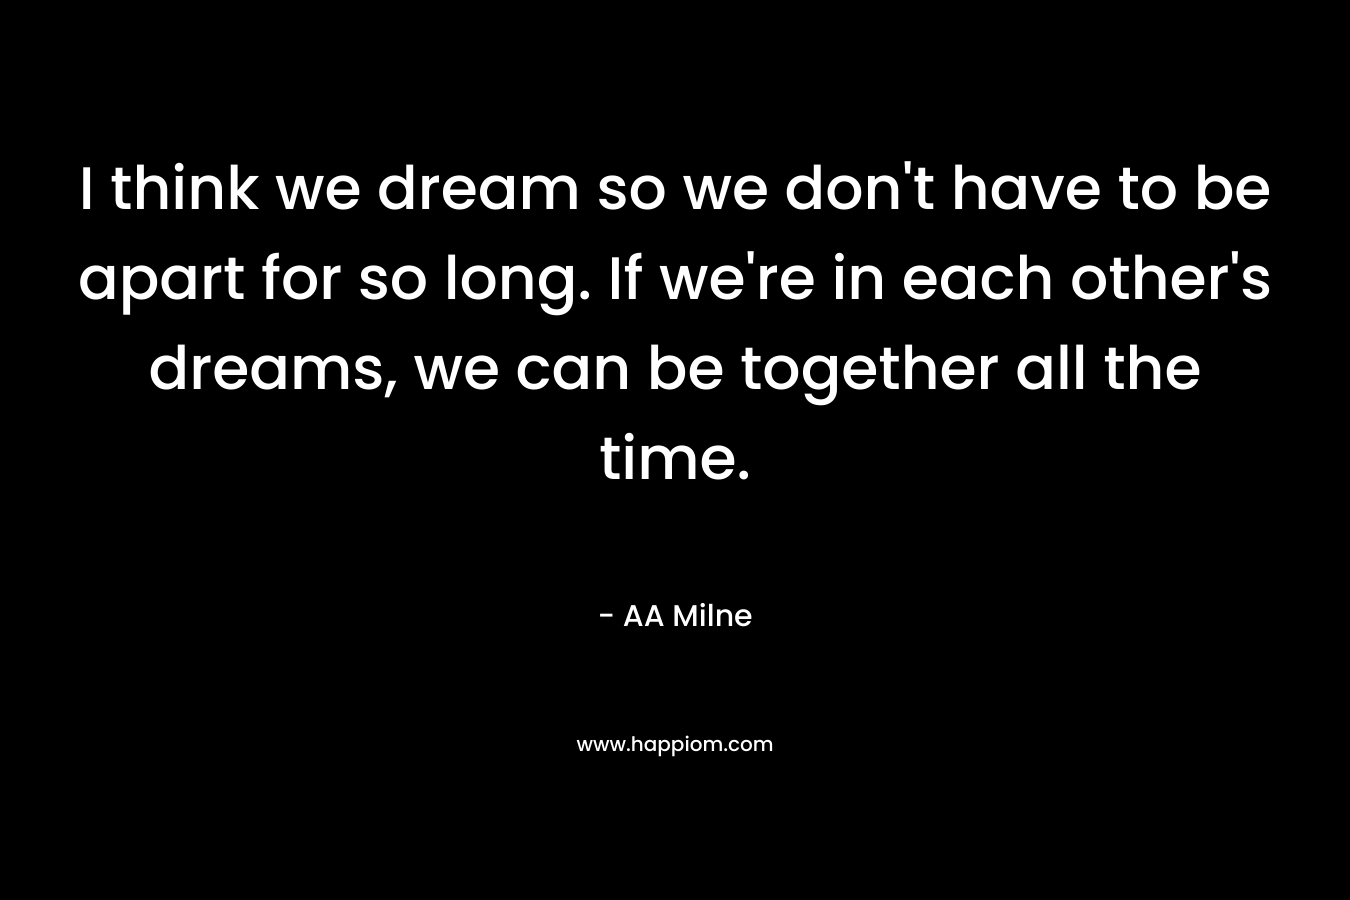 I think we dream so we don't have to be apart for so long. If we're in each other's dreams, we can be together all the time.